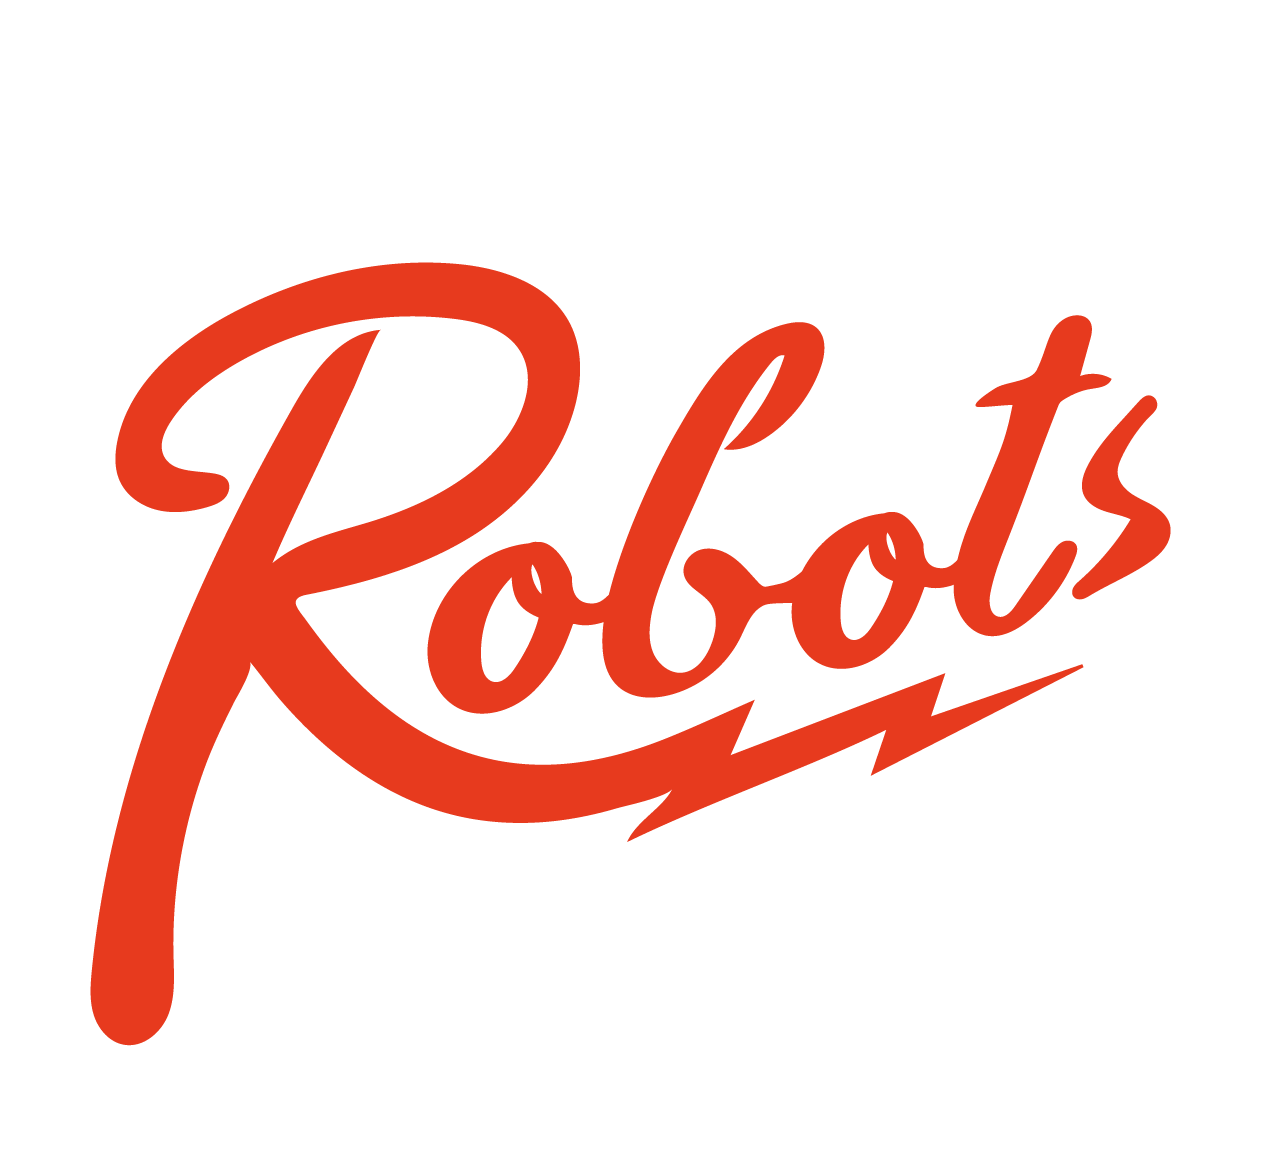 Robots For Eyes Podcast